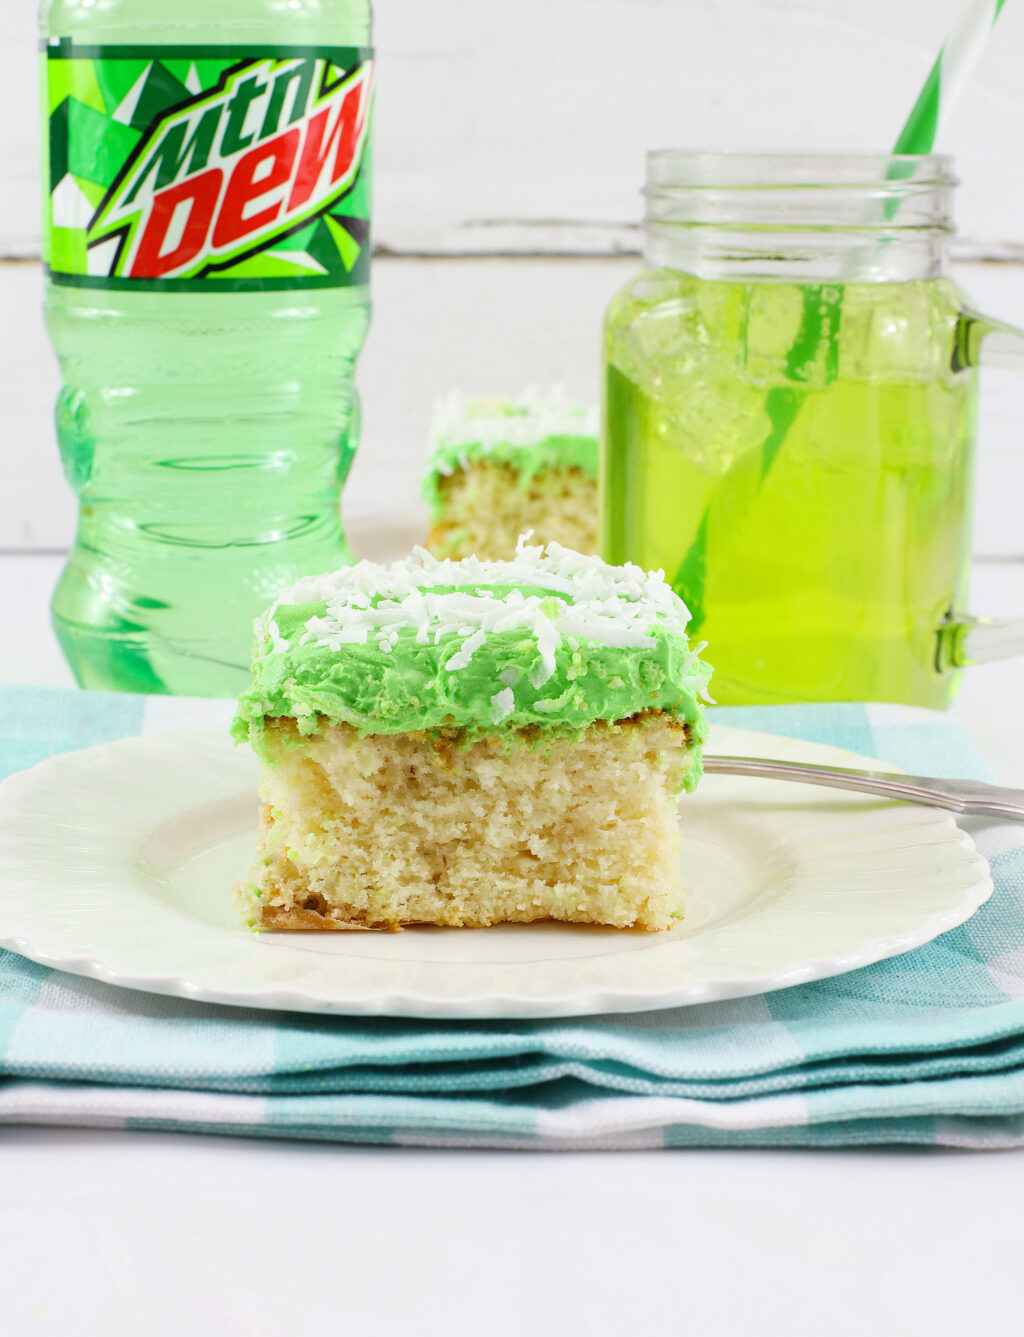 slice of mountain dew cake with mtn dew in the glass